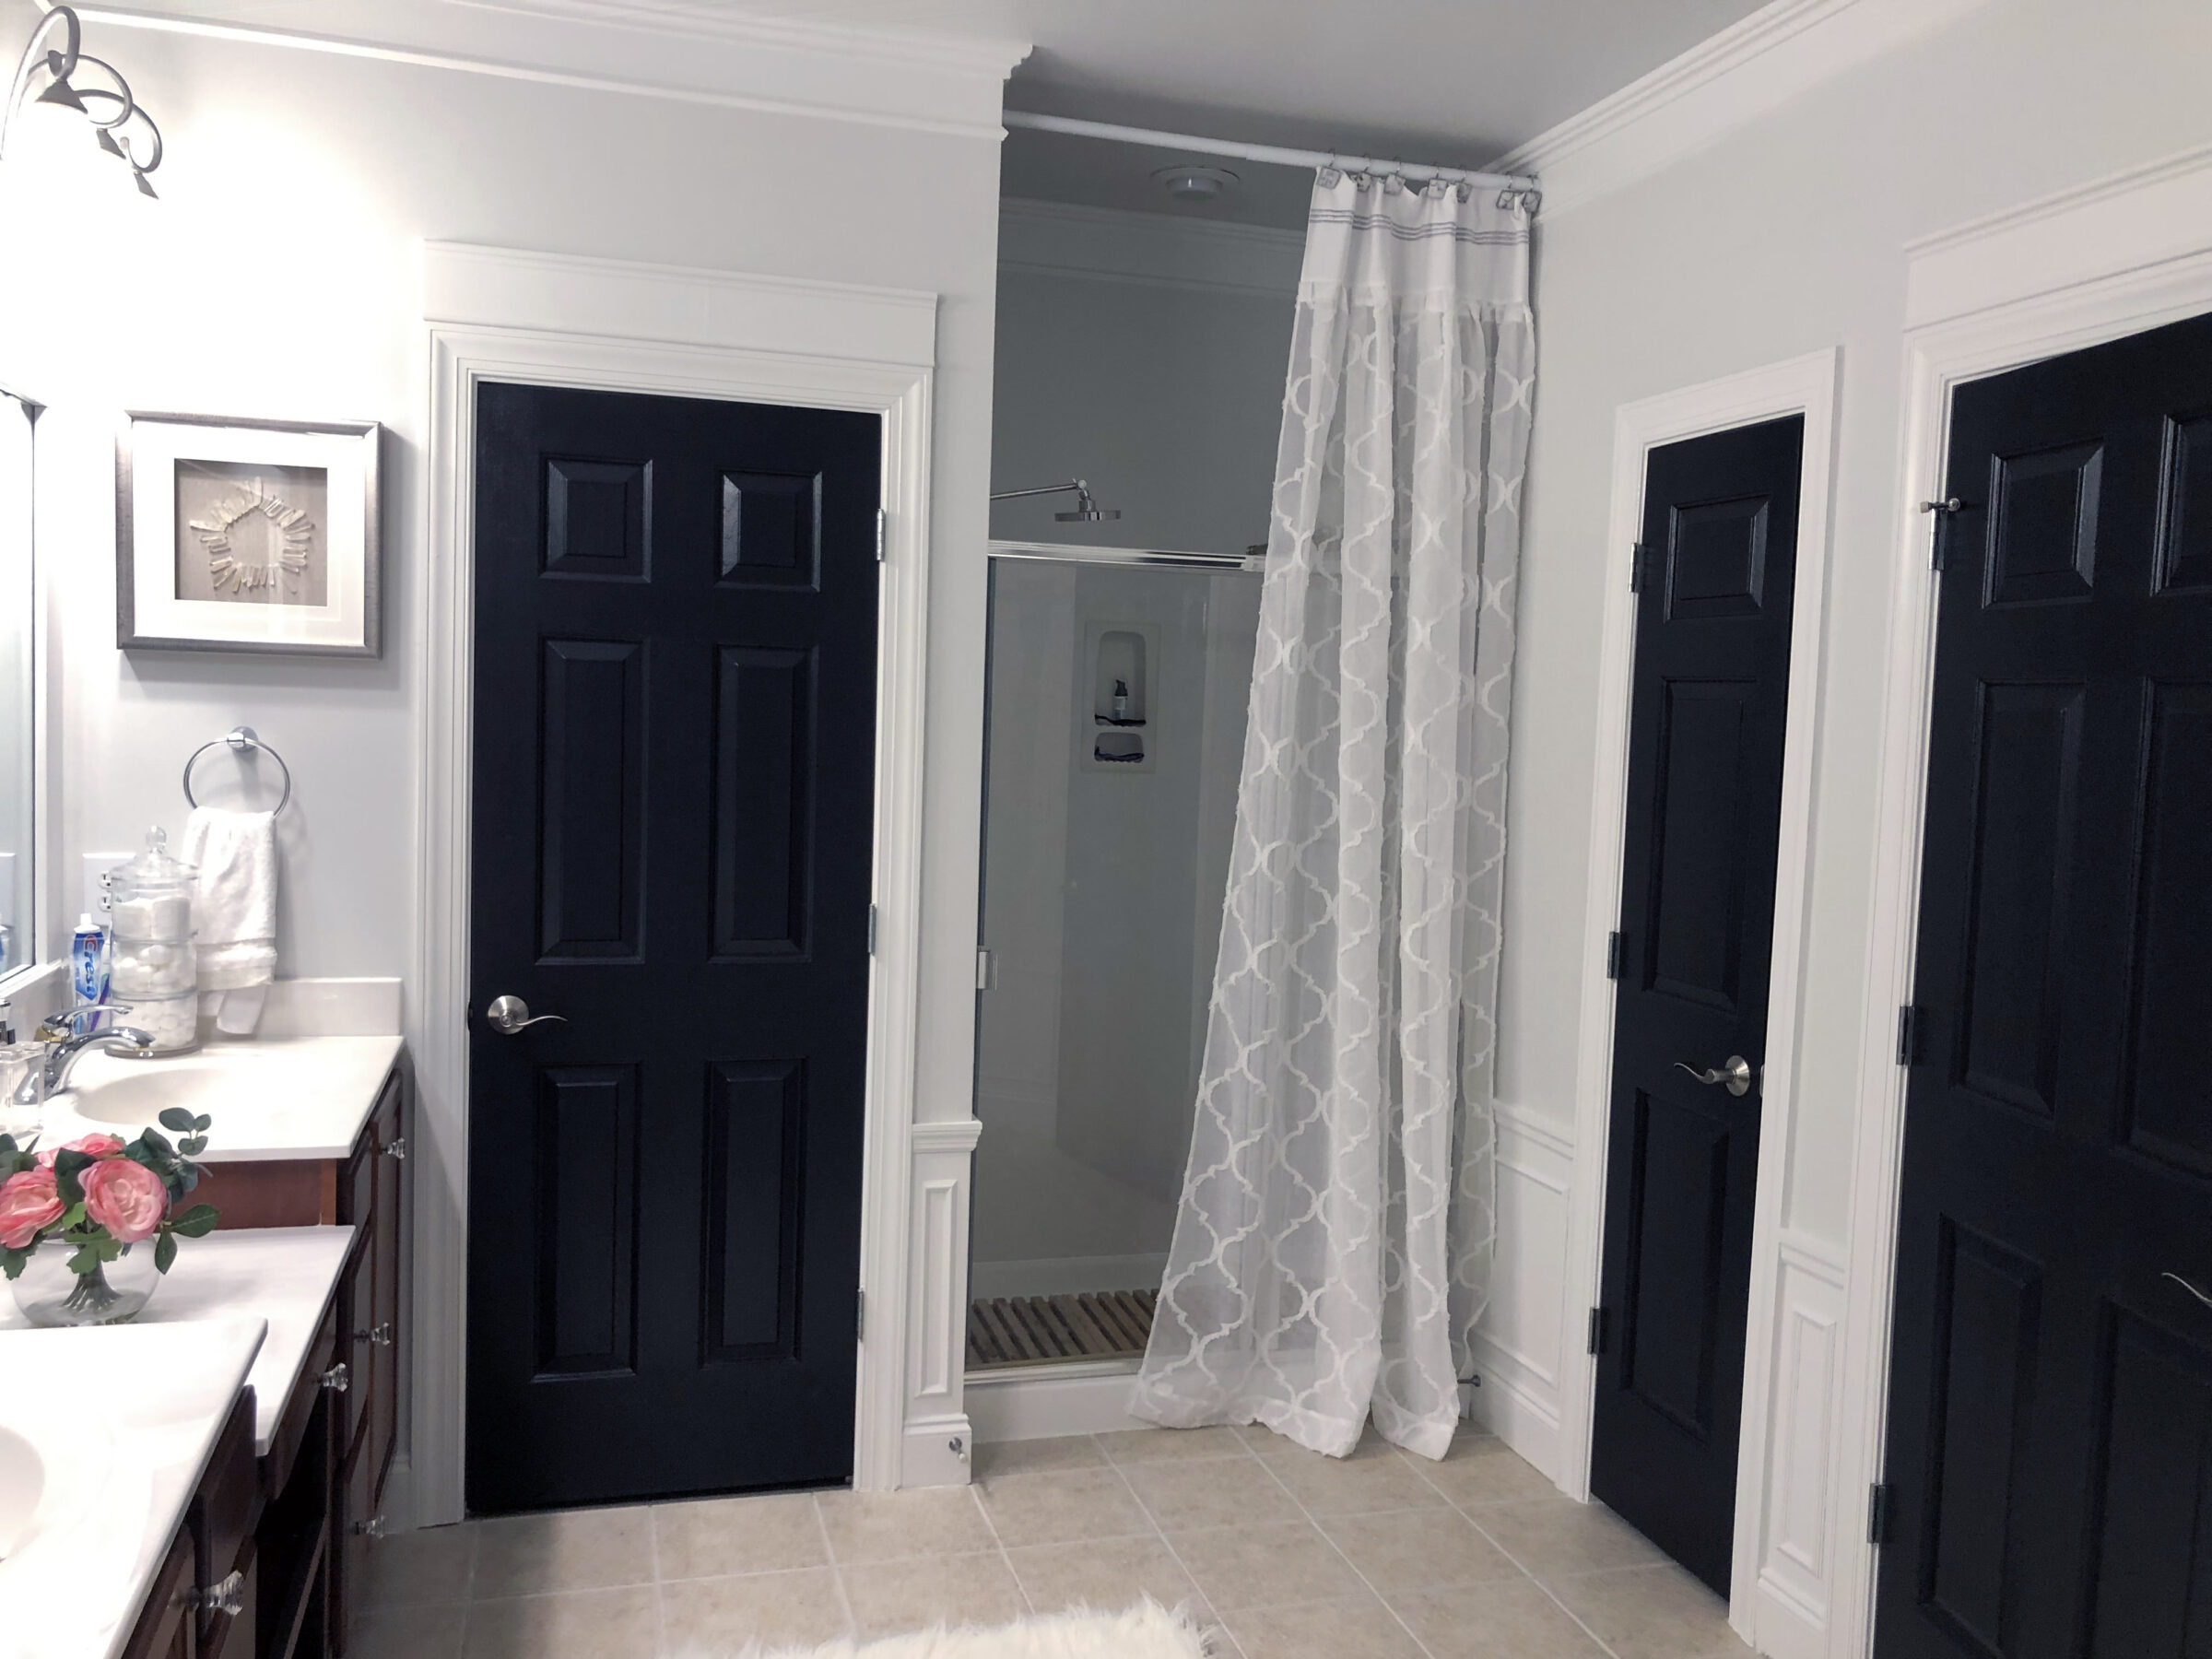 Cary_Master_Bathroom_After_01